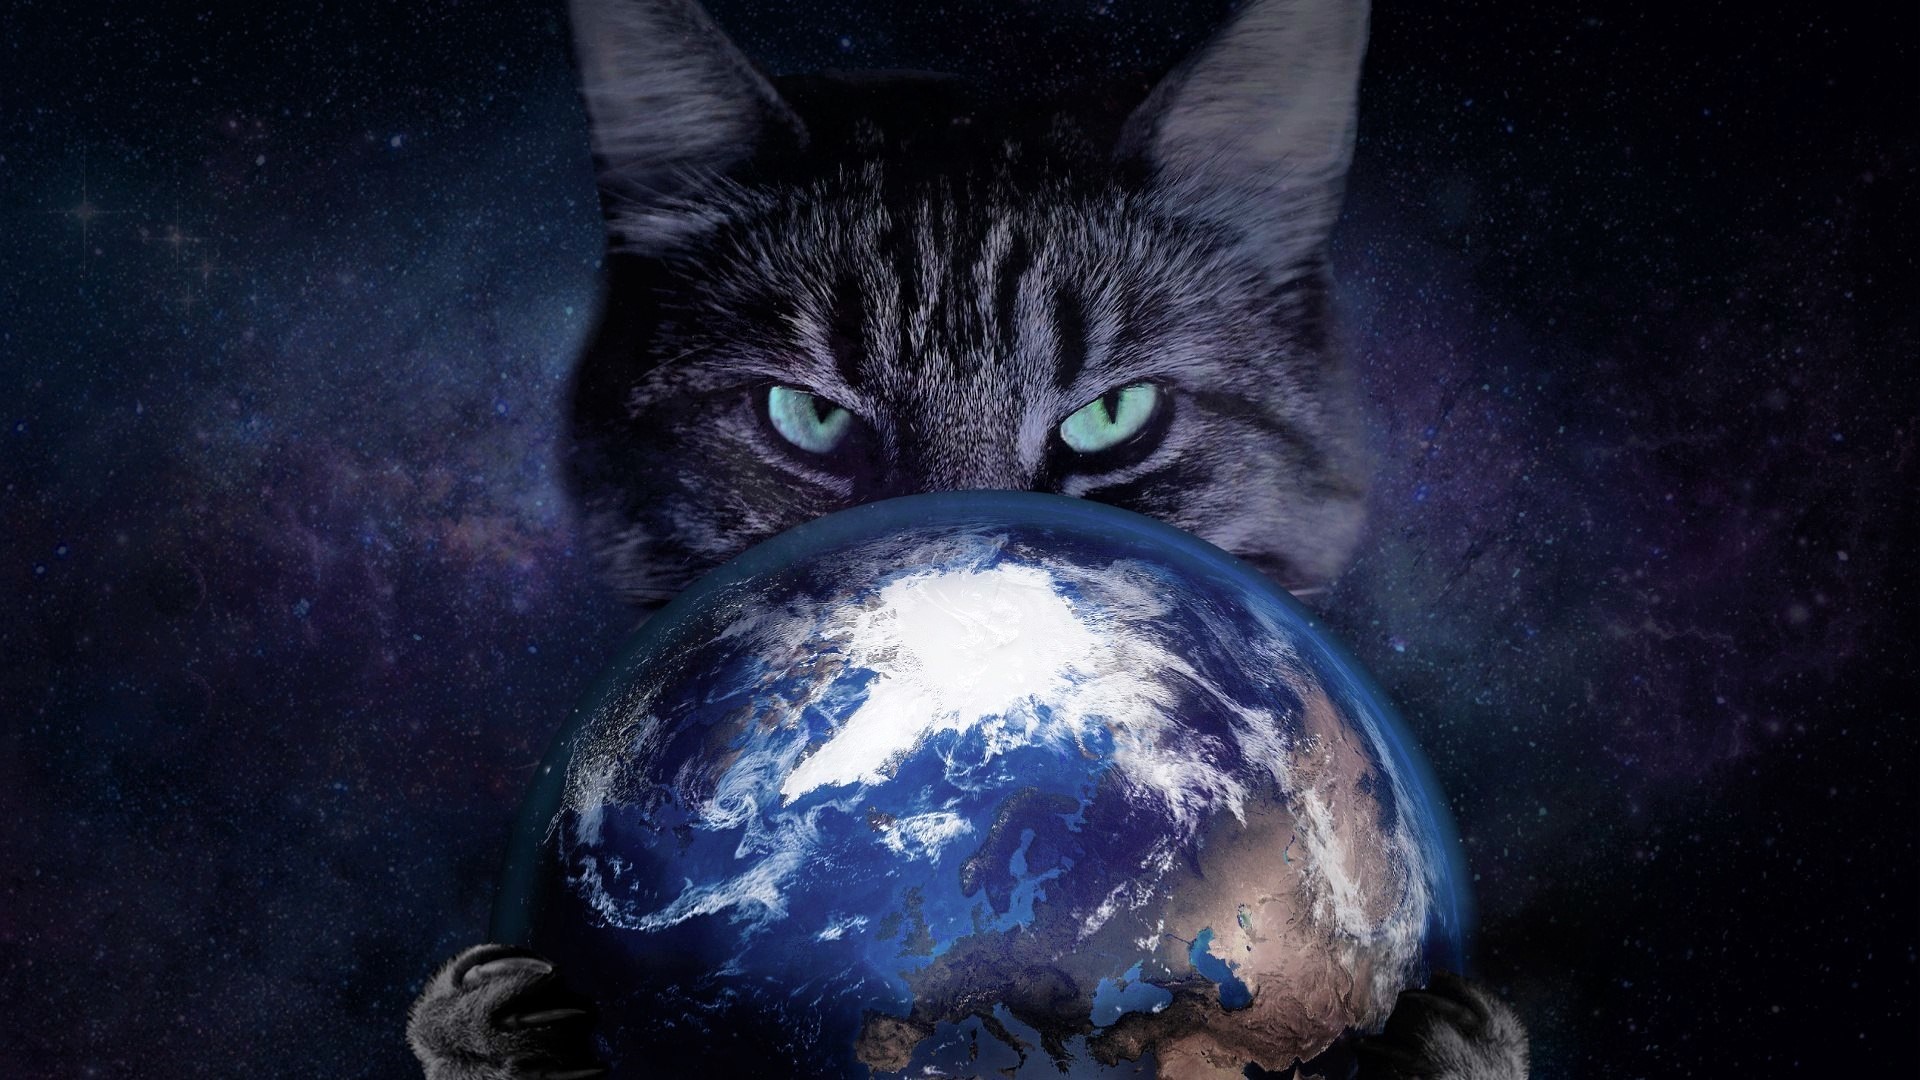 1920x1080 Photography - Manipulation Artistic Photoshop Cat Planet Earth Wallpaper